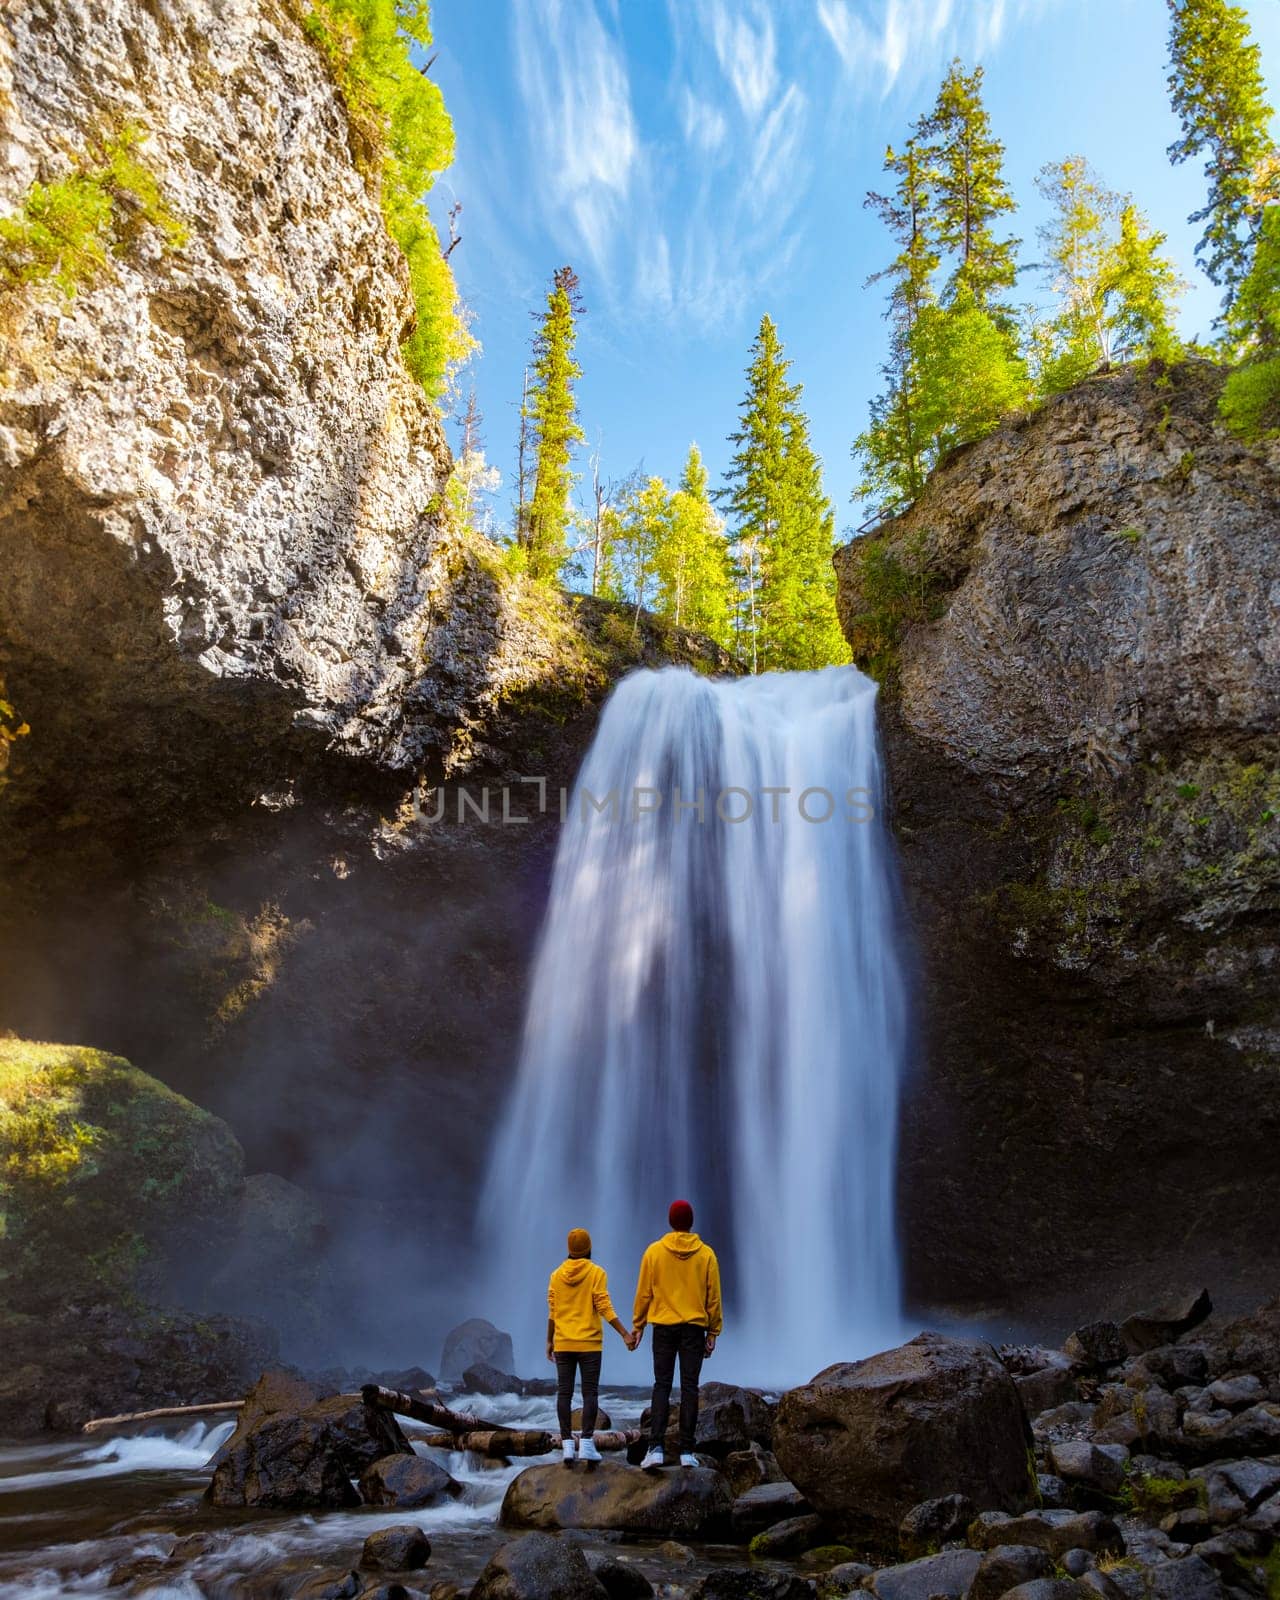 Moul Falls Canada a Beautiful waterfall in Canada British Columbia, a couple of men and a woman visit Moul Falls, the most famous waterfall in Wells Gray Provincial Park.